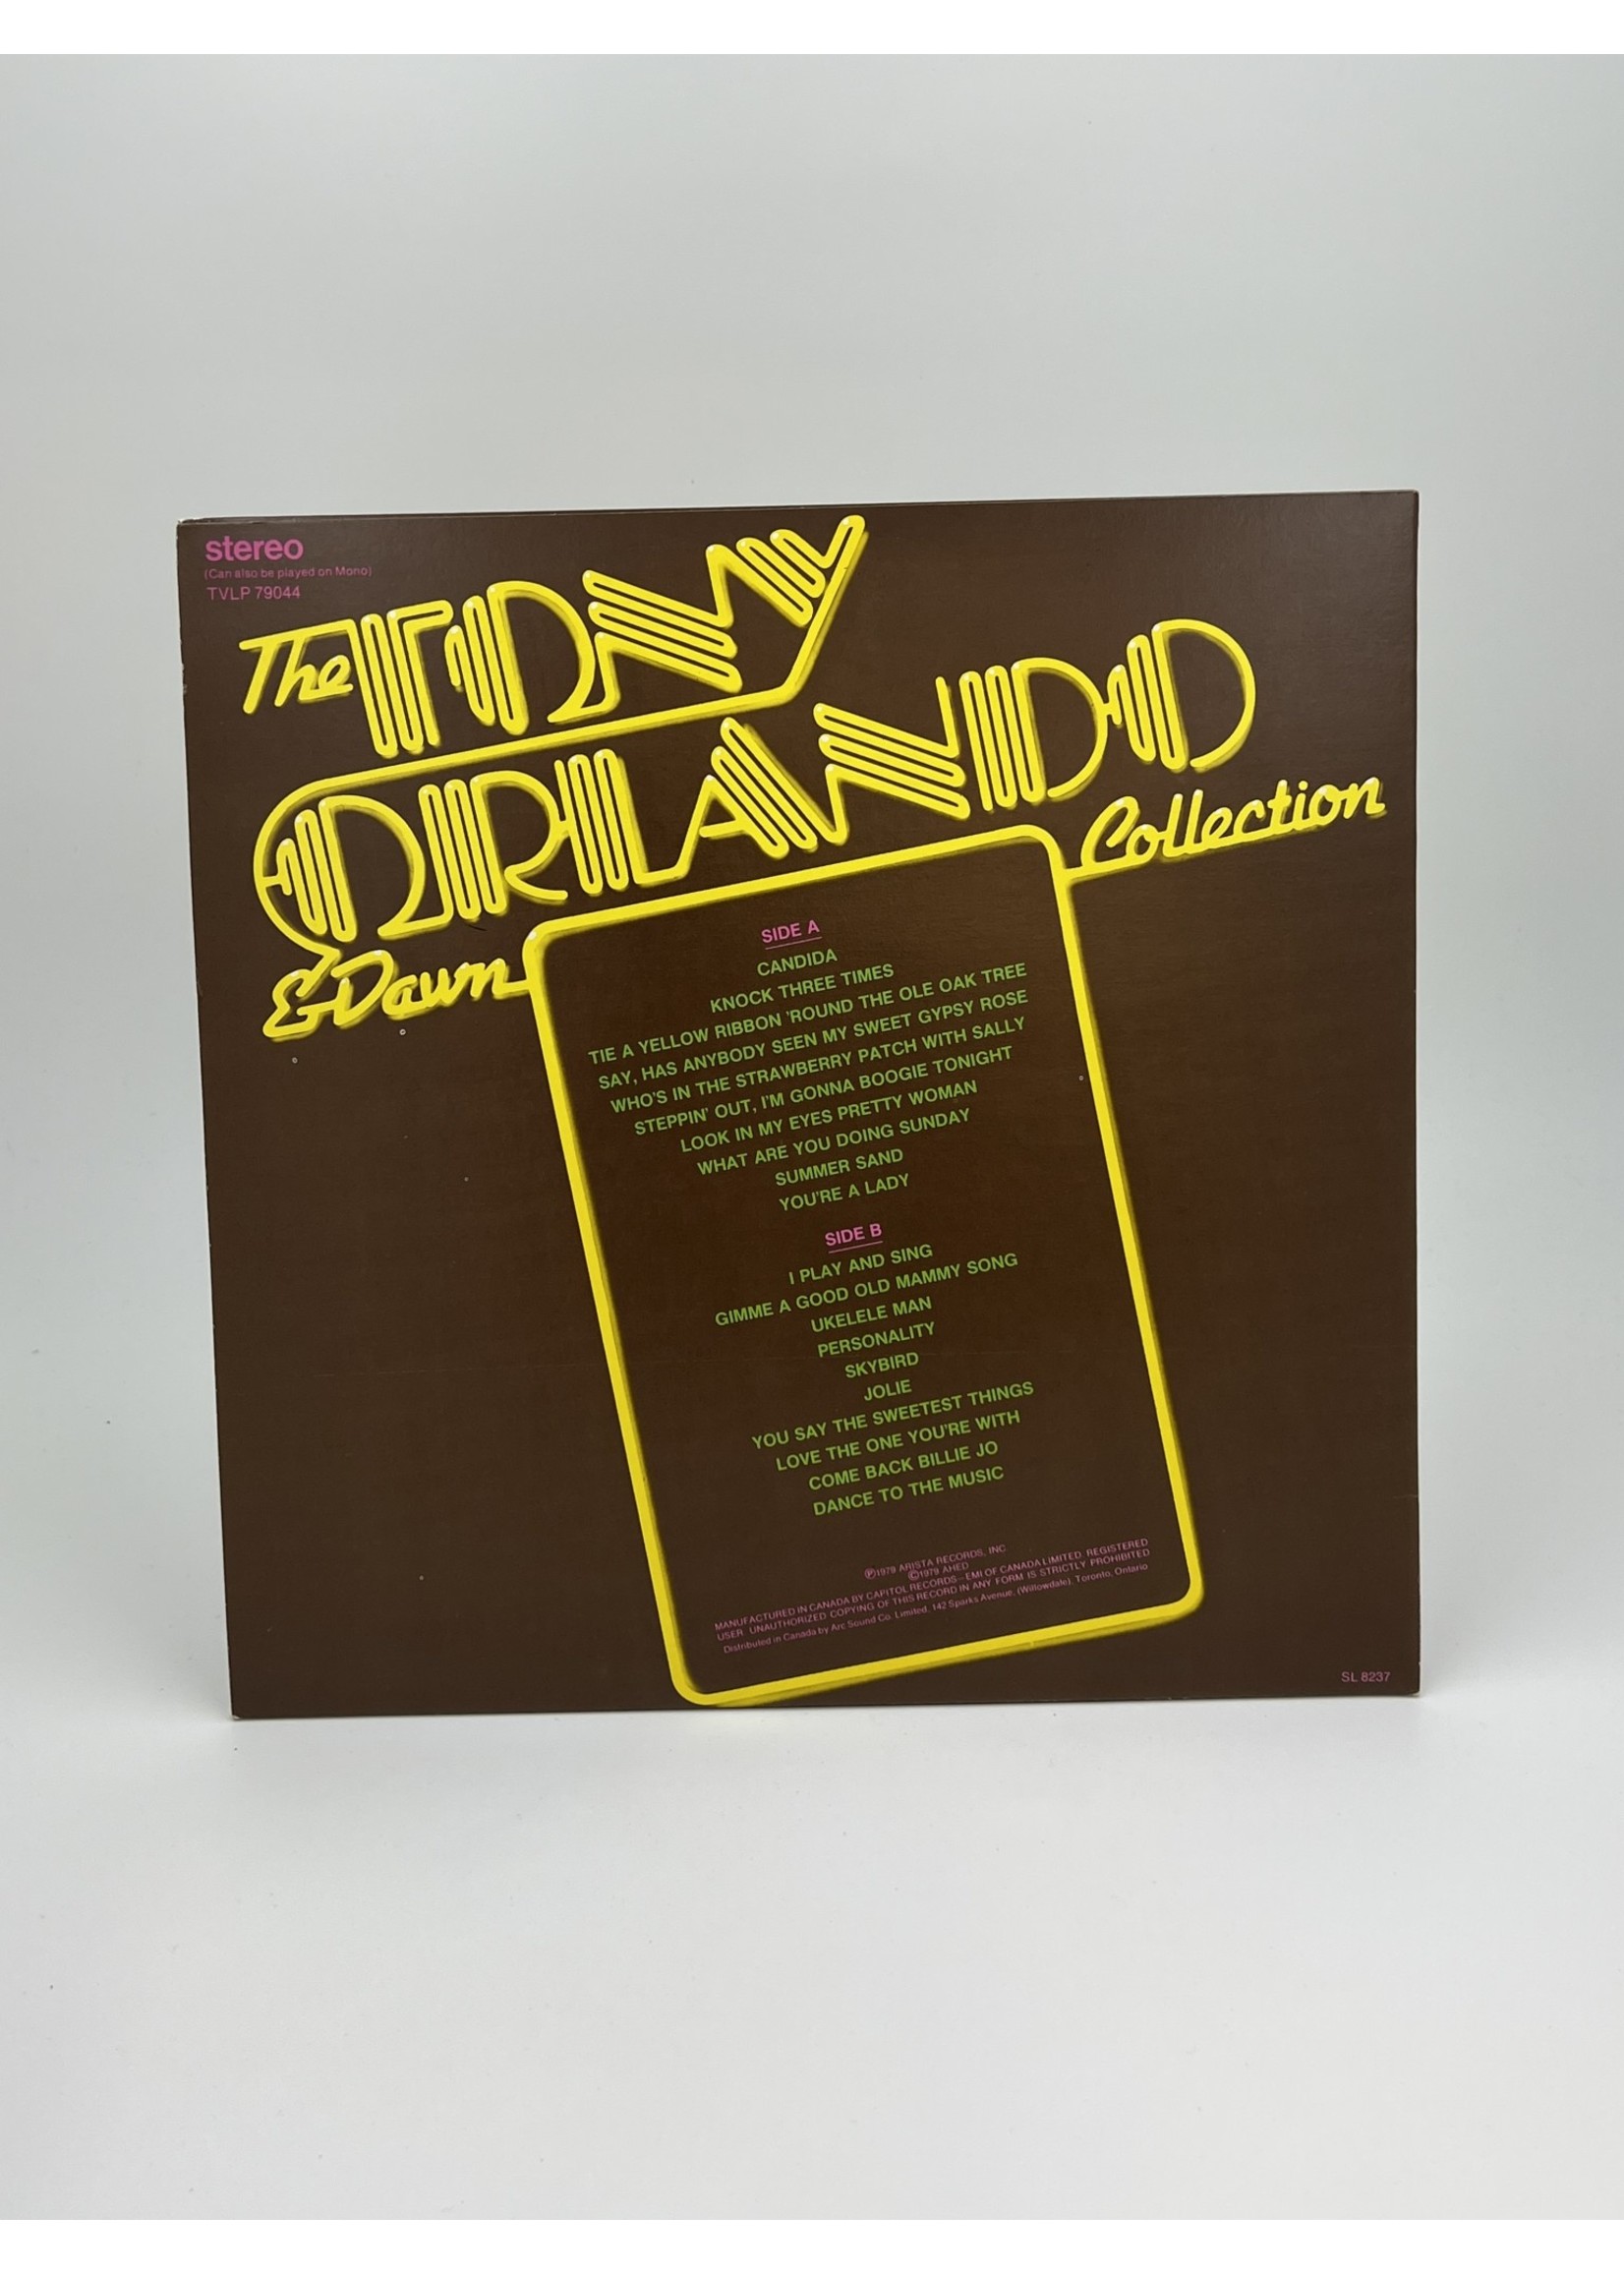 LP The Tony Orlando and Dawn Collection 20 Greatest Hits LP Record